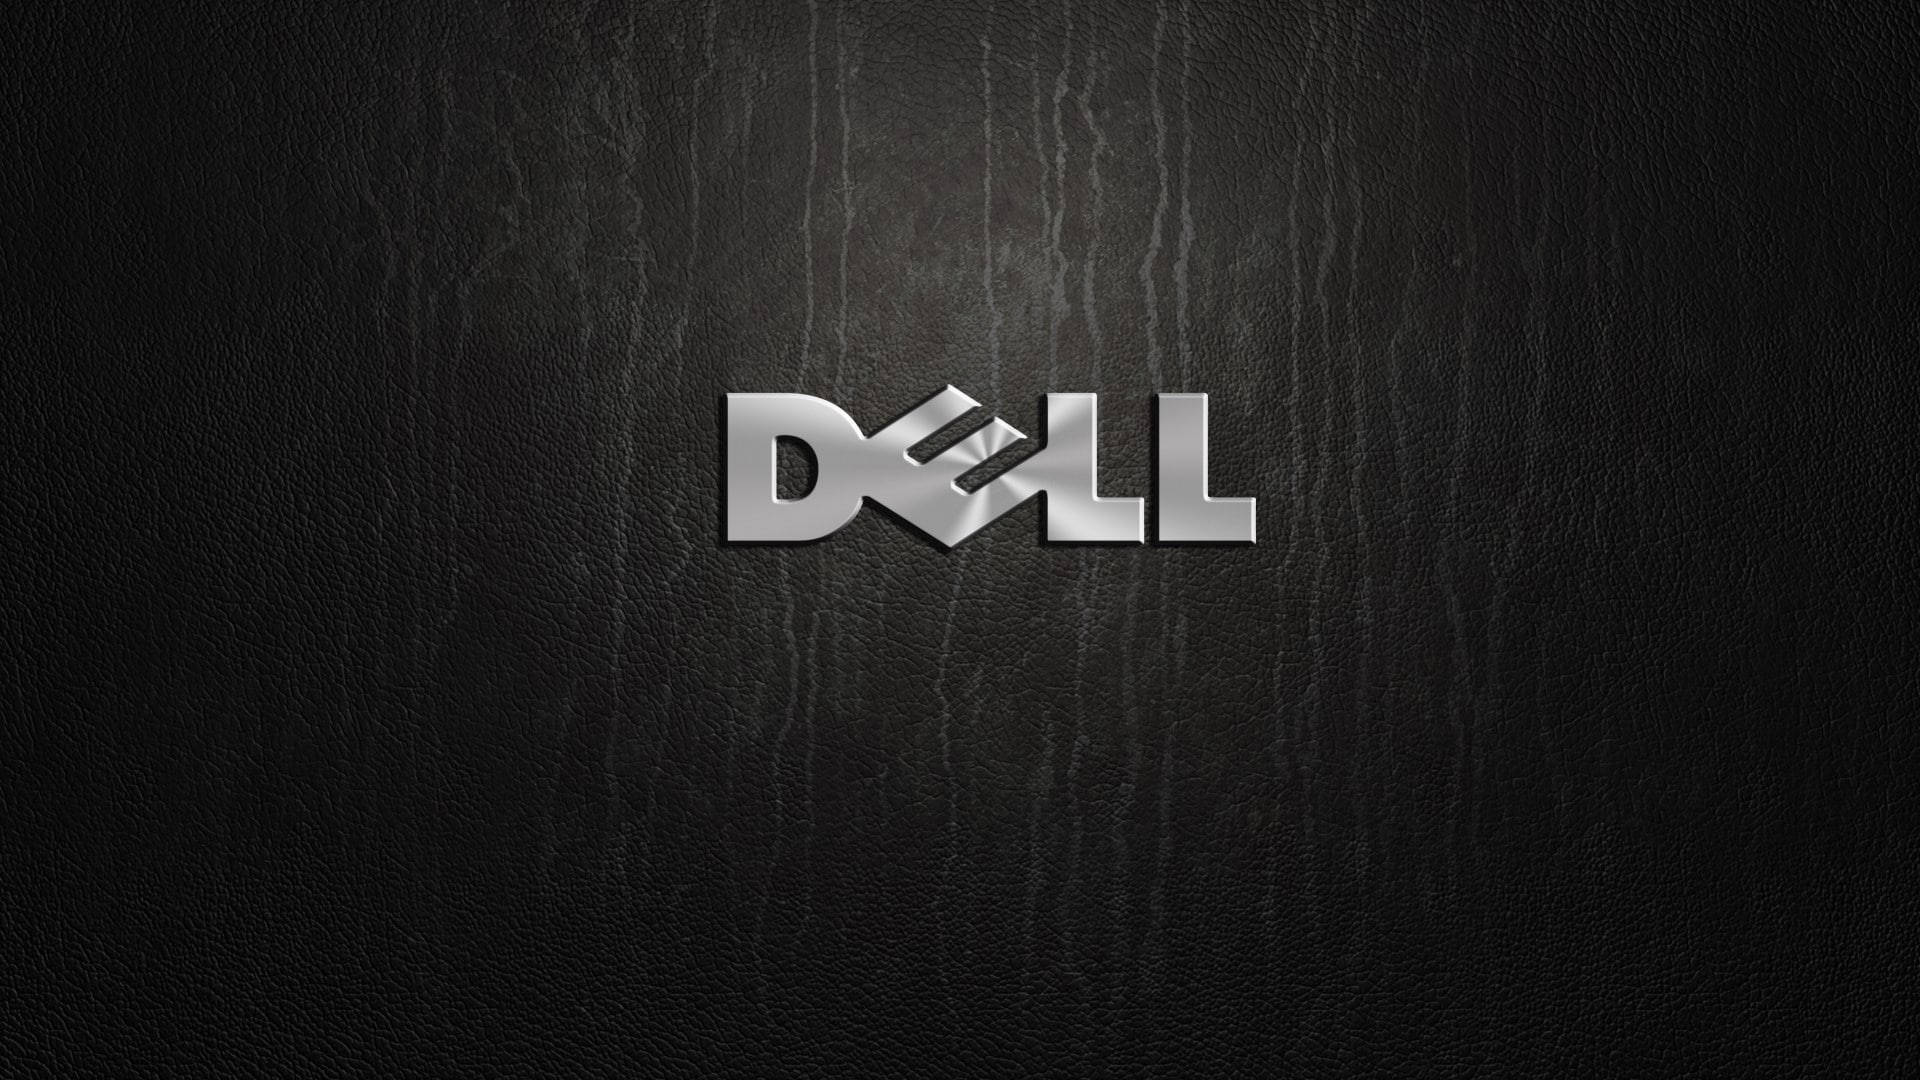 100 Dell Laptop Wallpapers